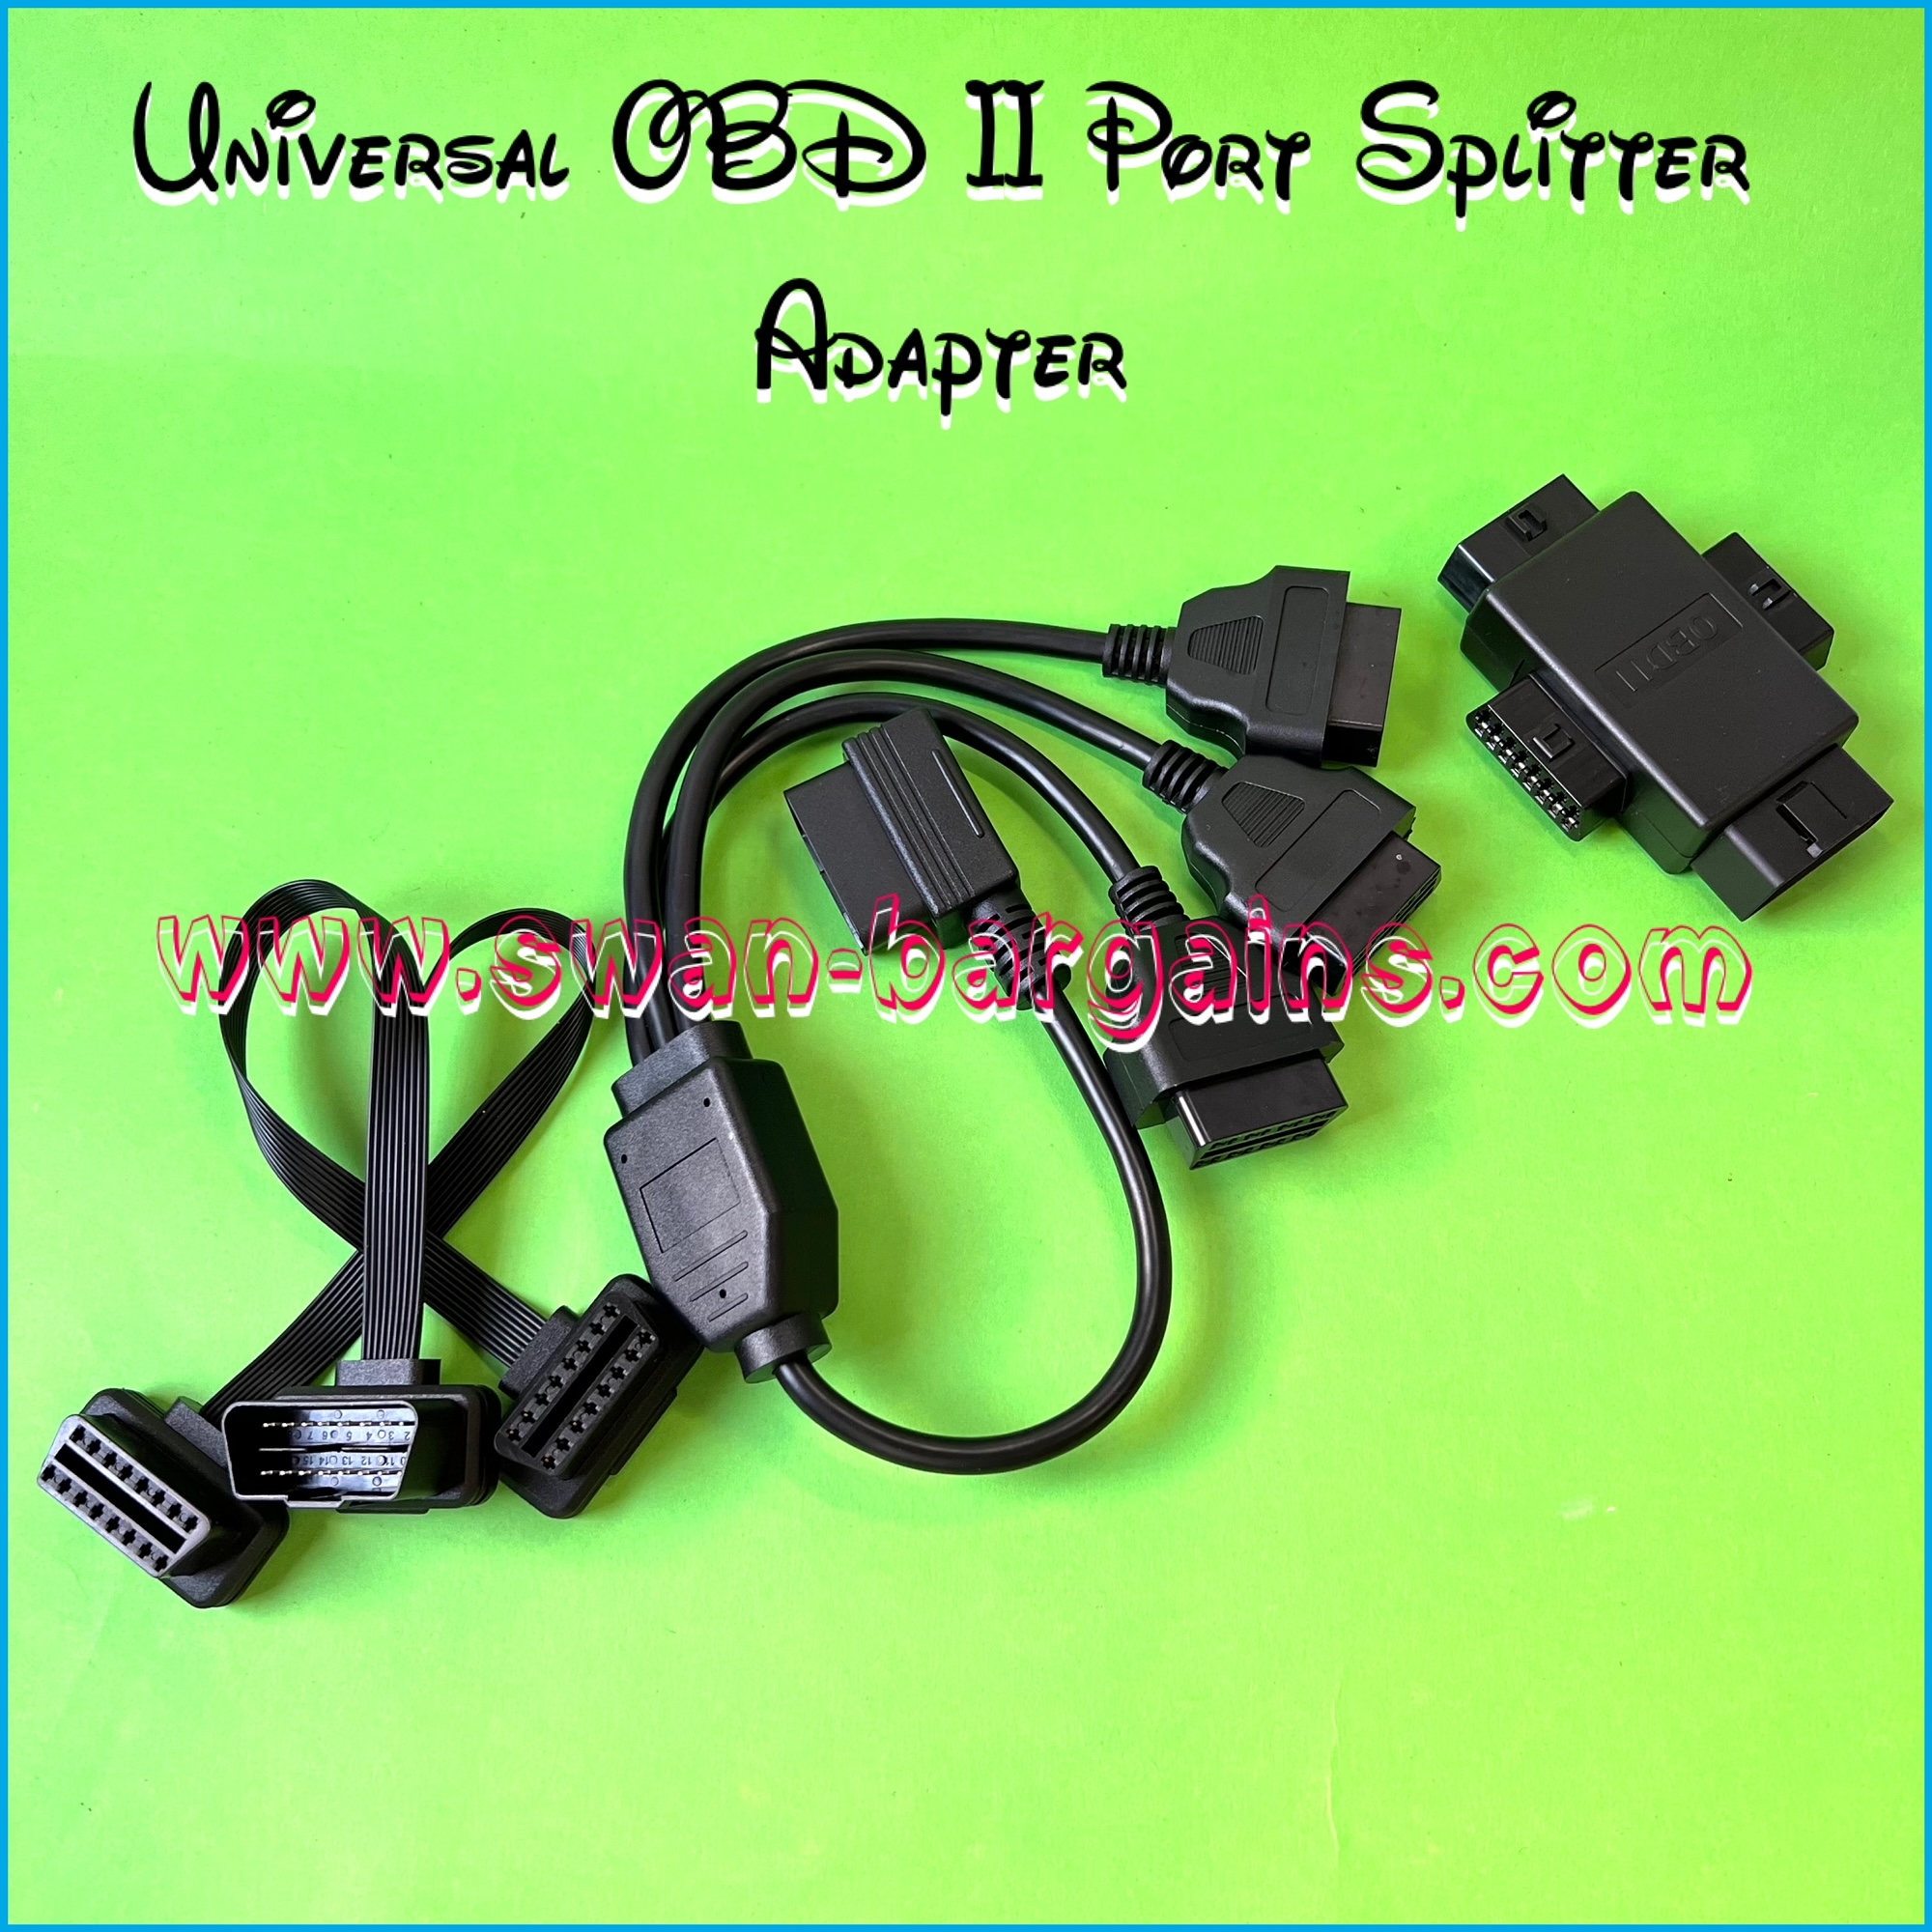 OBD II Port Splitter Adapter Cable Singapore